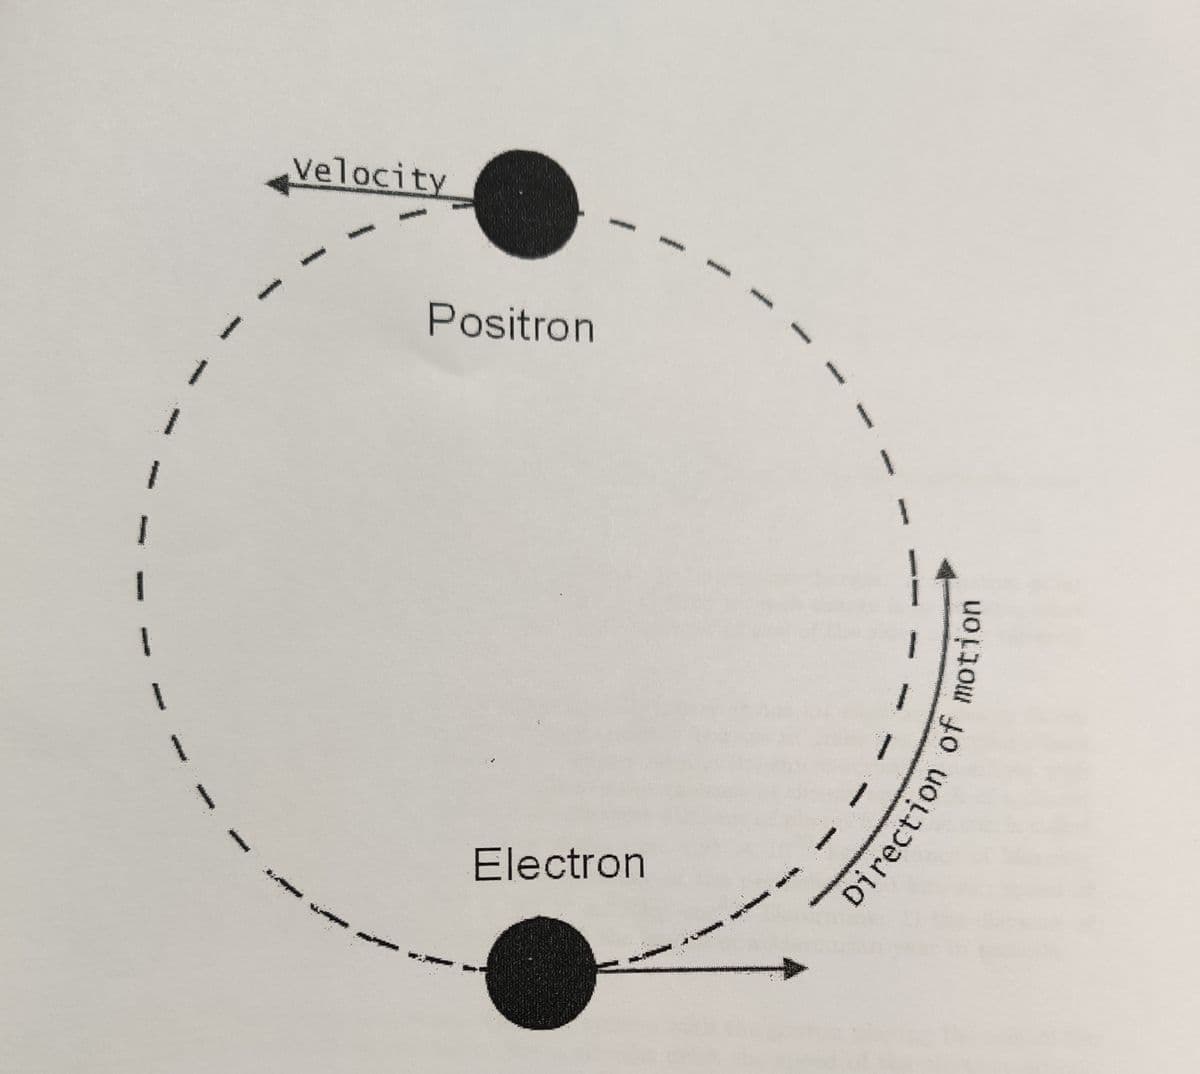 Velocity
Positron
²
Electron
A
www
1
Direction of motion